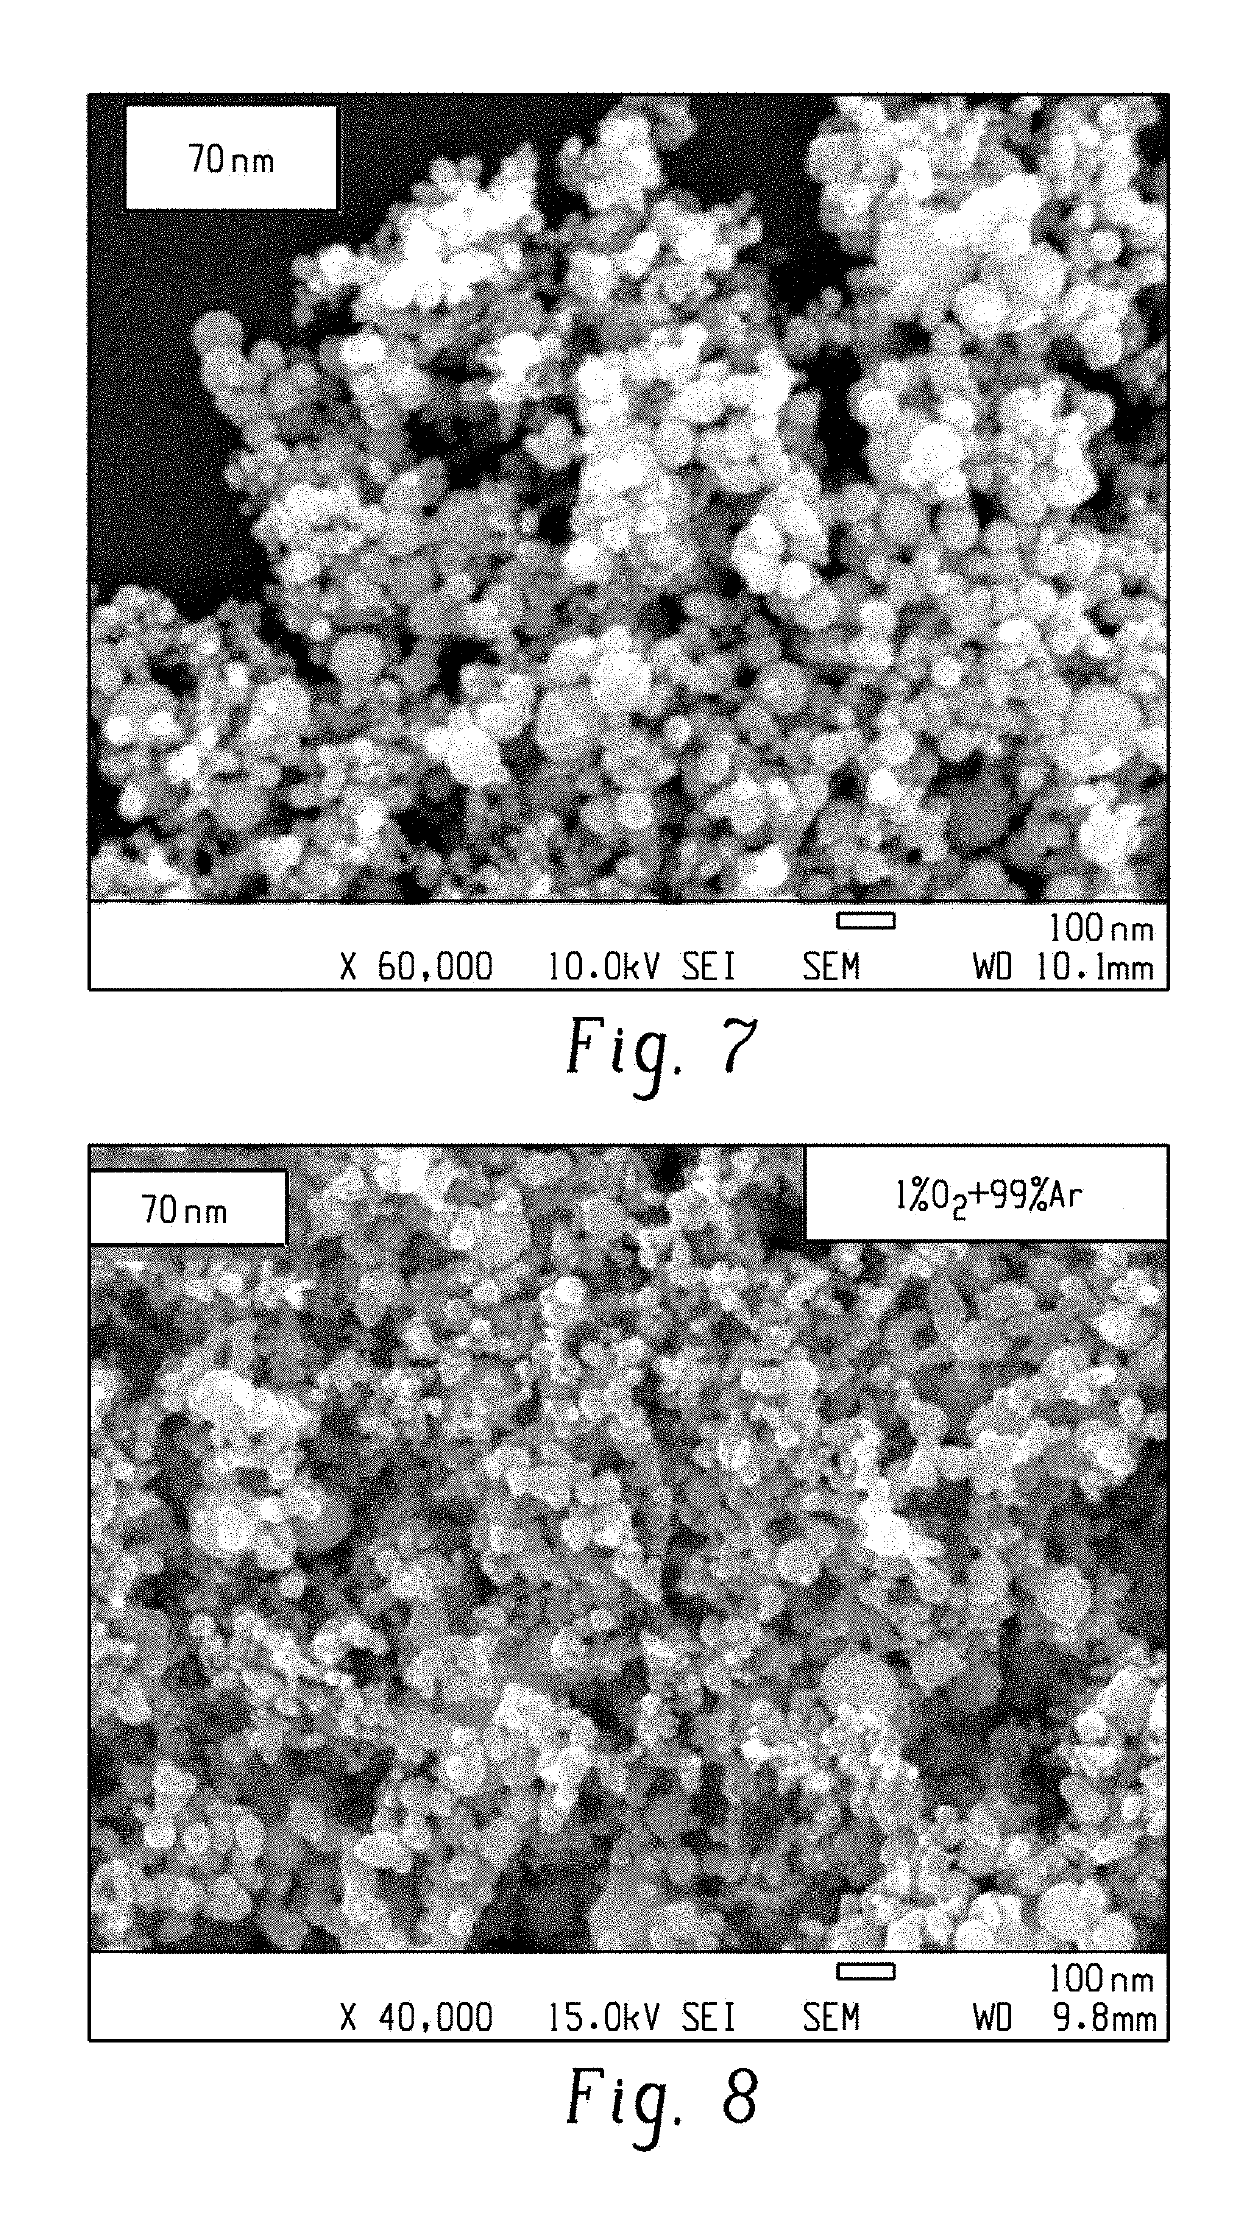 Core-shell particles, magneto-dielectric materials, methods of making, and uses thereof